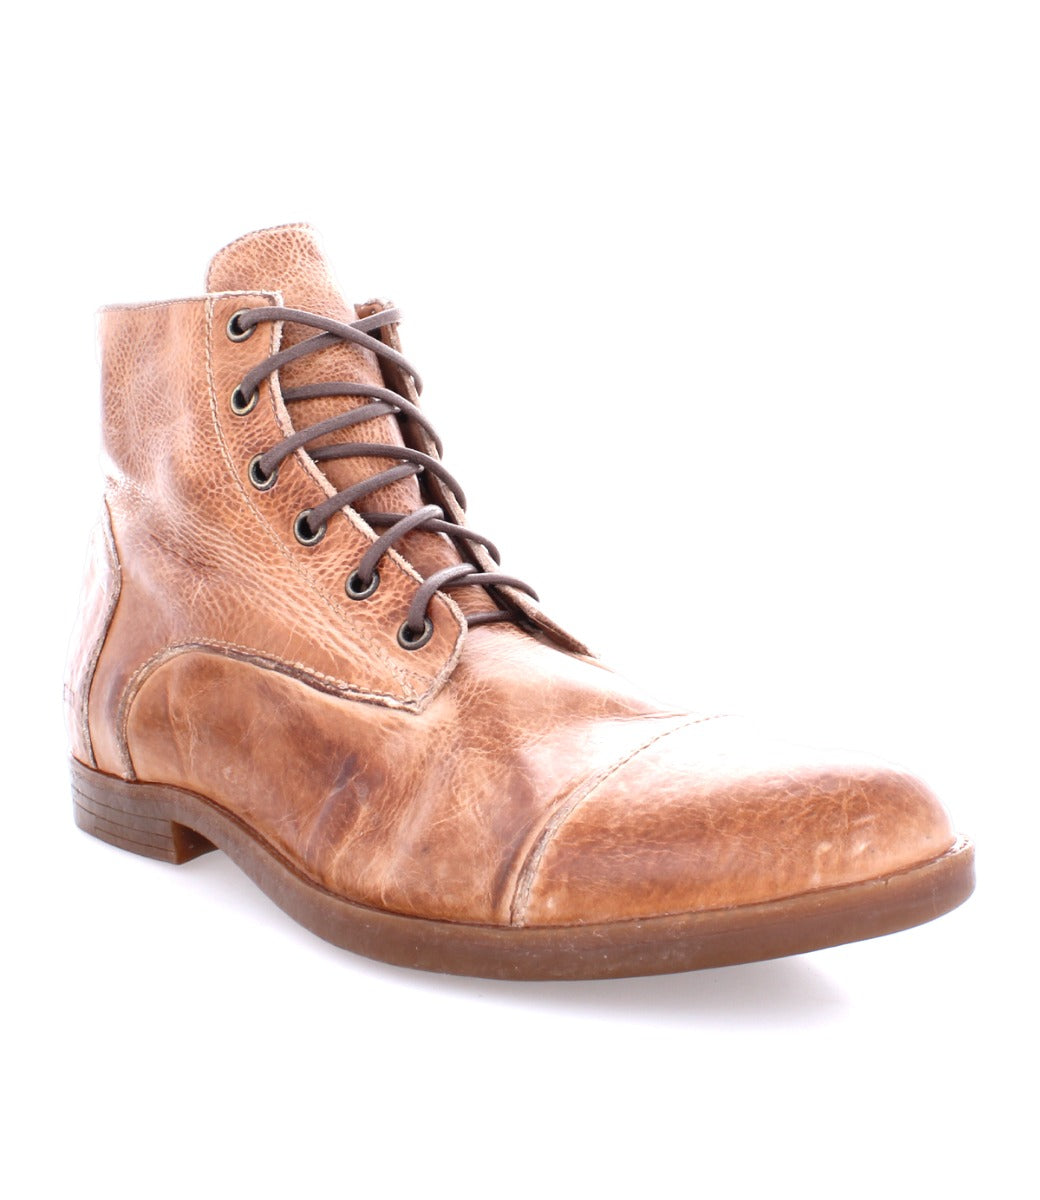 A men's Leonardo tan leather boot with laces by Bed Stu.